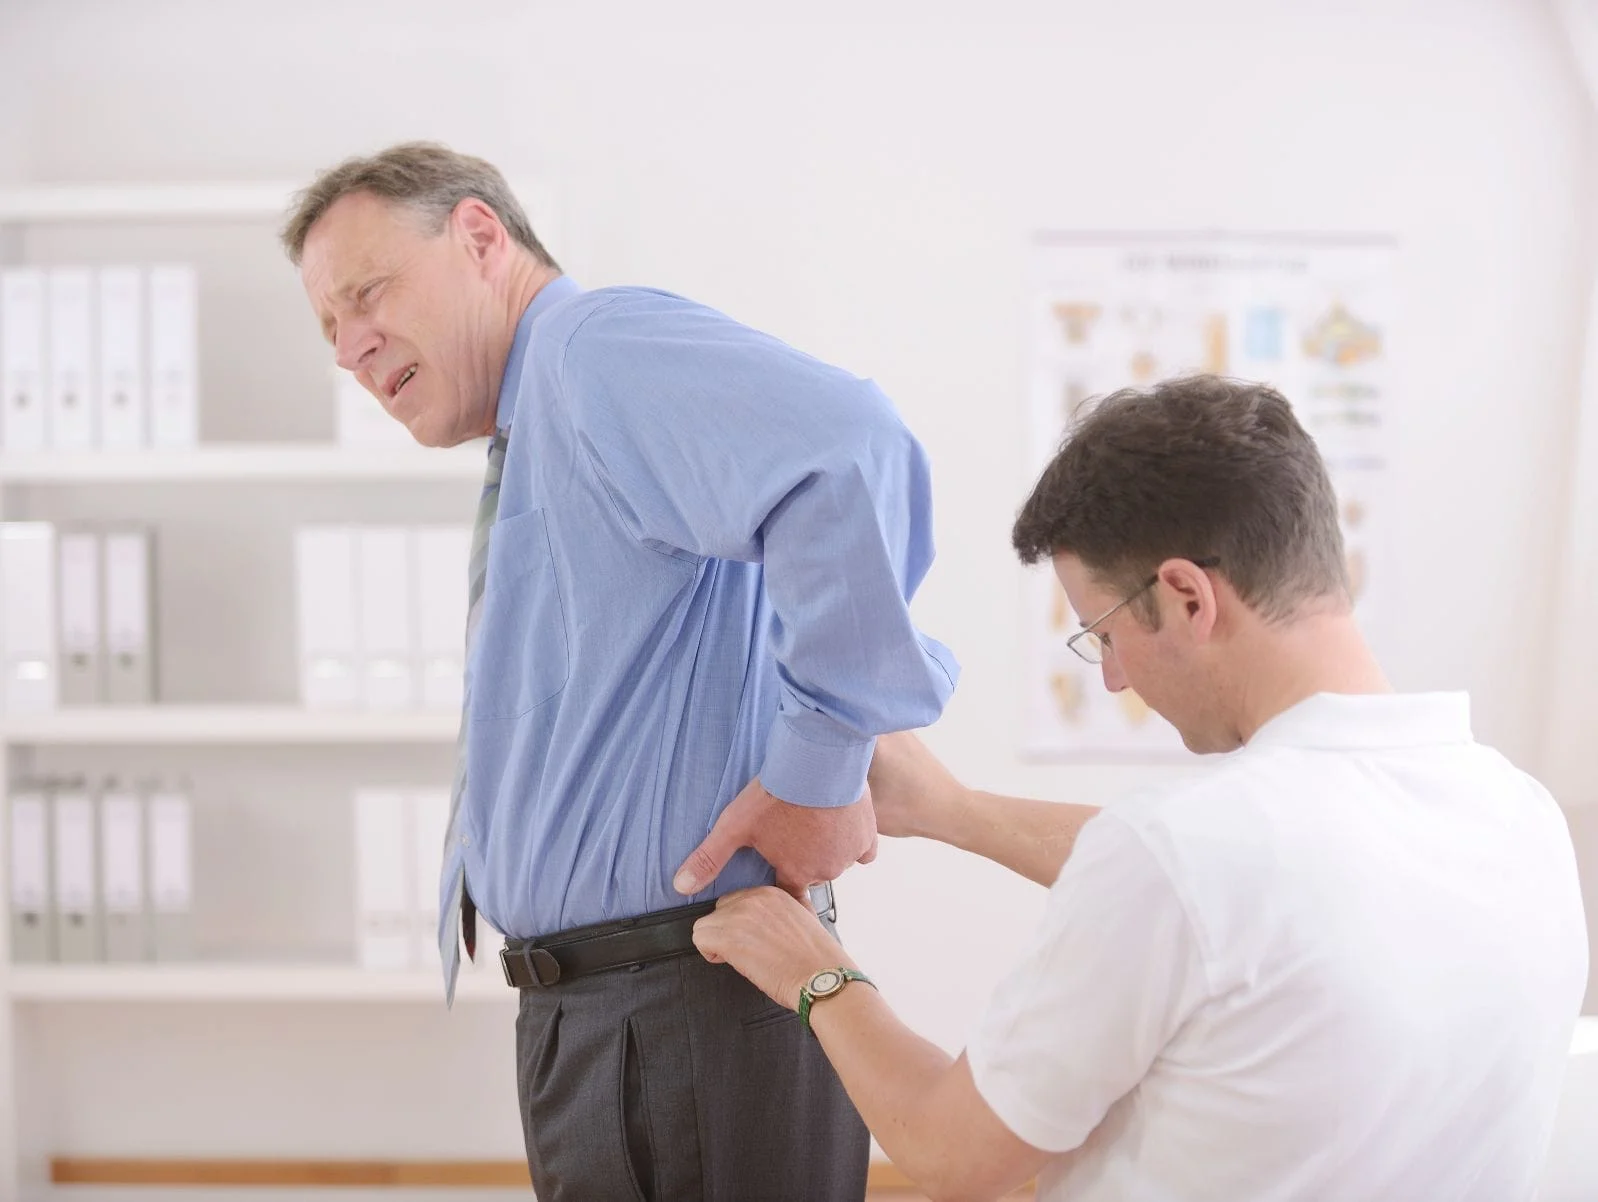 Do you have fibromyalgia and suffer from chronic pains? Find natural pain relief methods with our Birmingham chiropractor. Call us today to learn more!